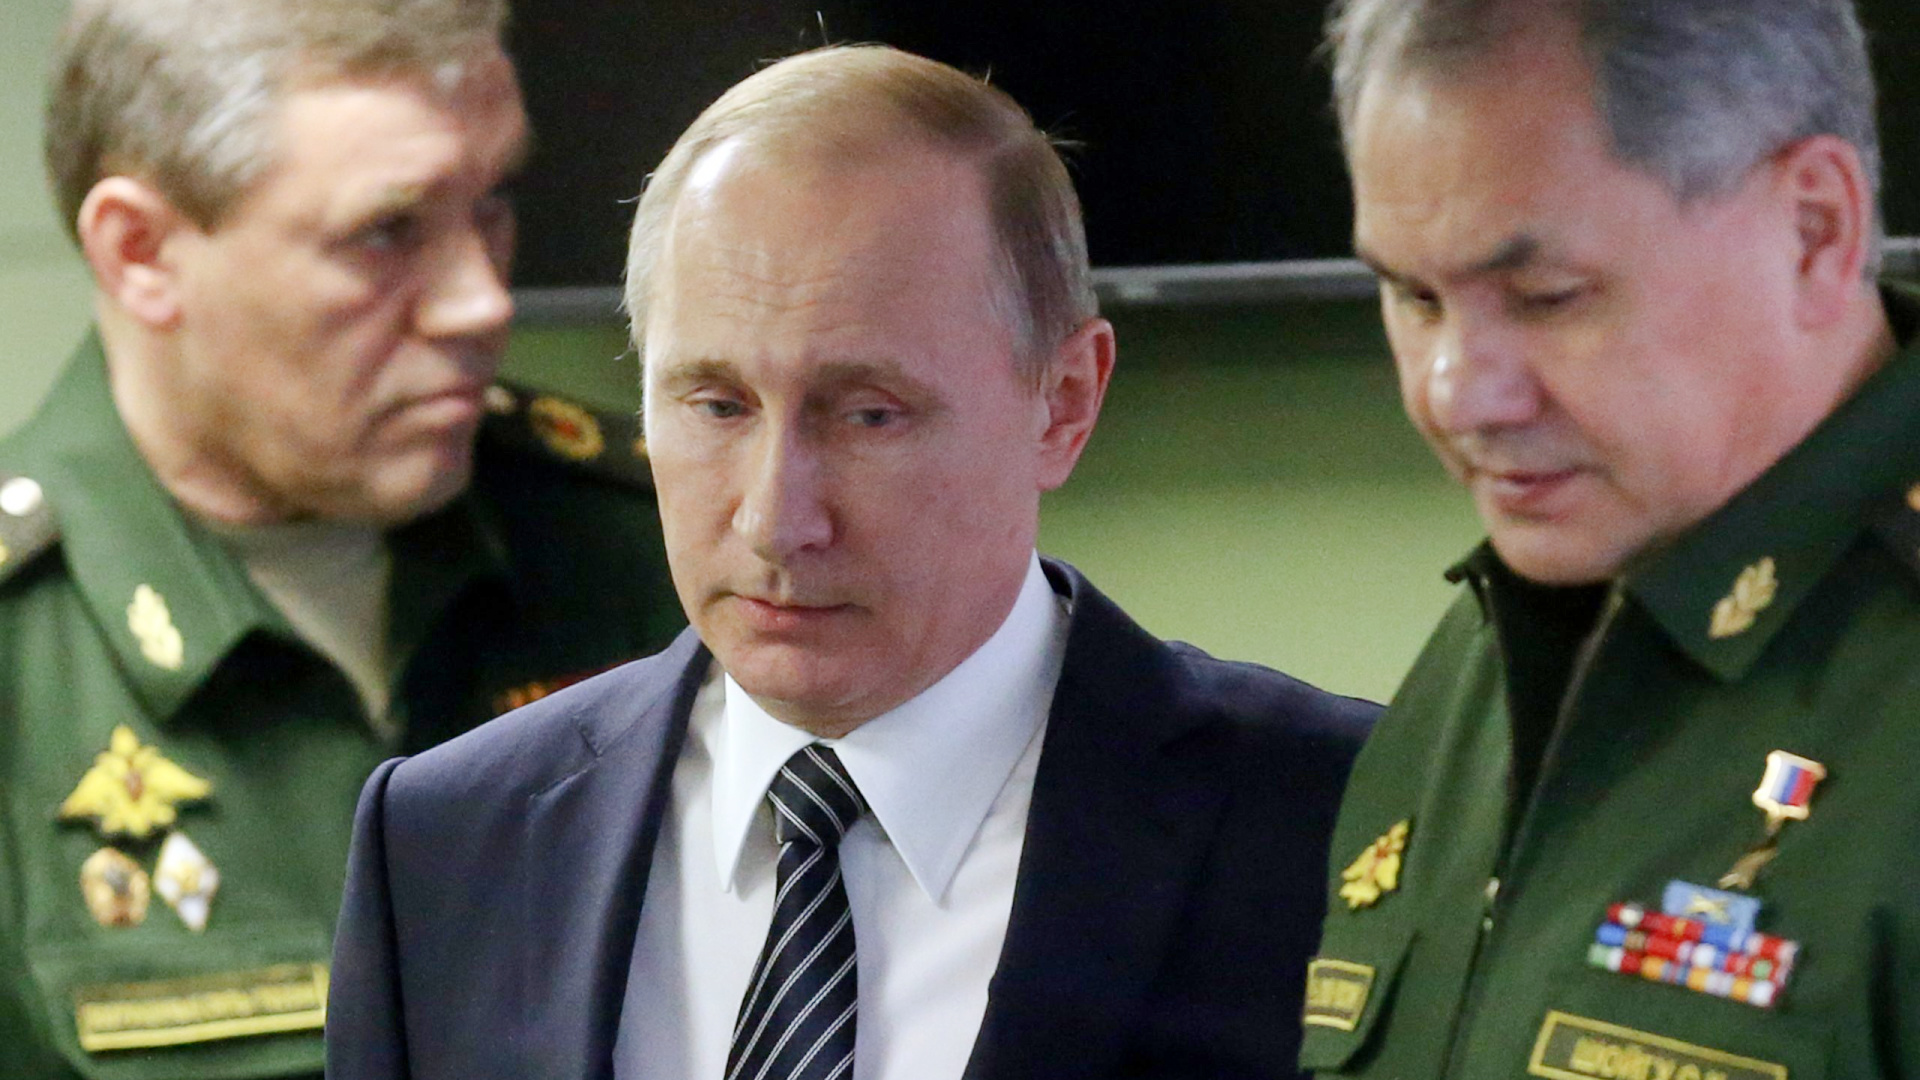 The International Criminal Court orders the arrest of two of Putin's key men